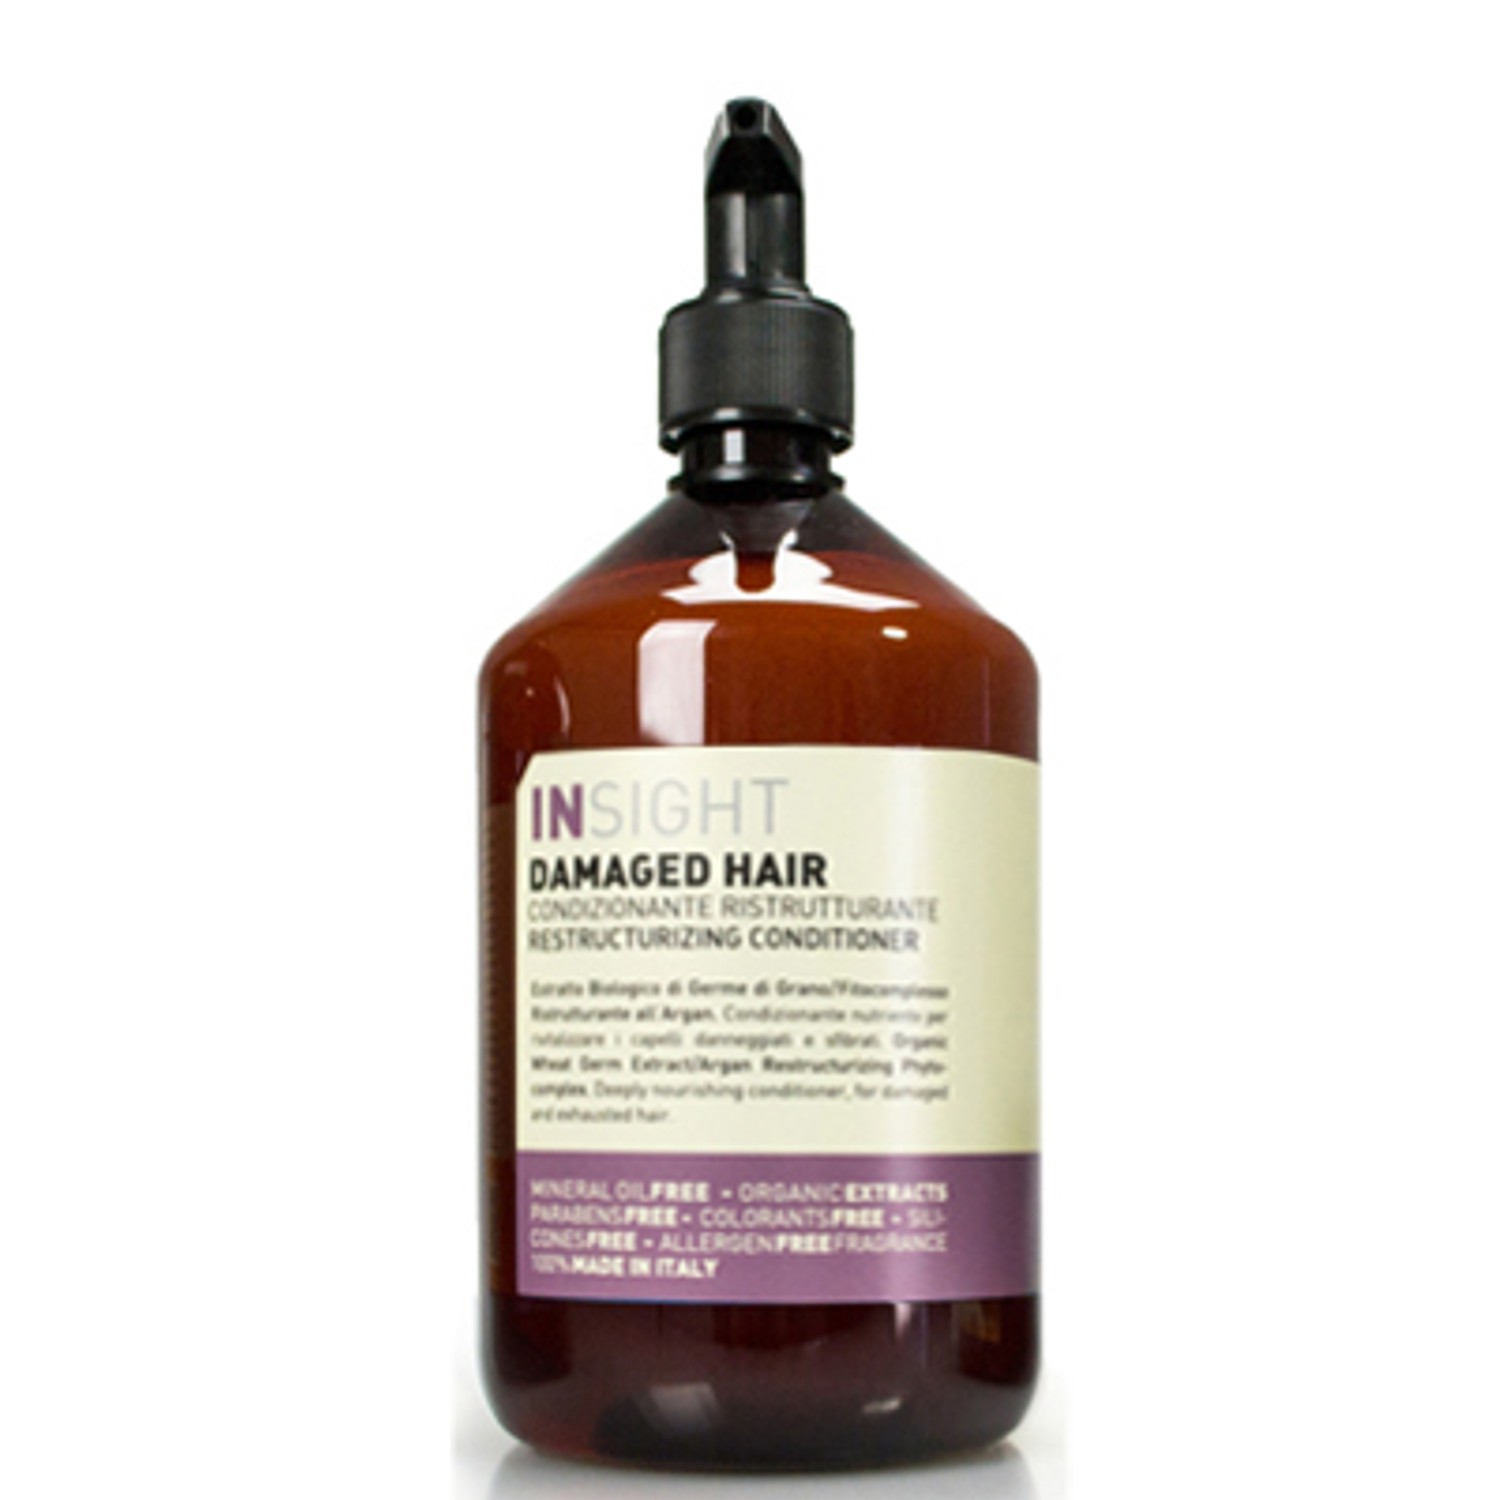 INSIGHT Damaged Hair Restructurizing Conditioner 400 ml